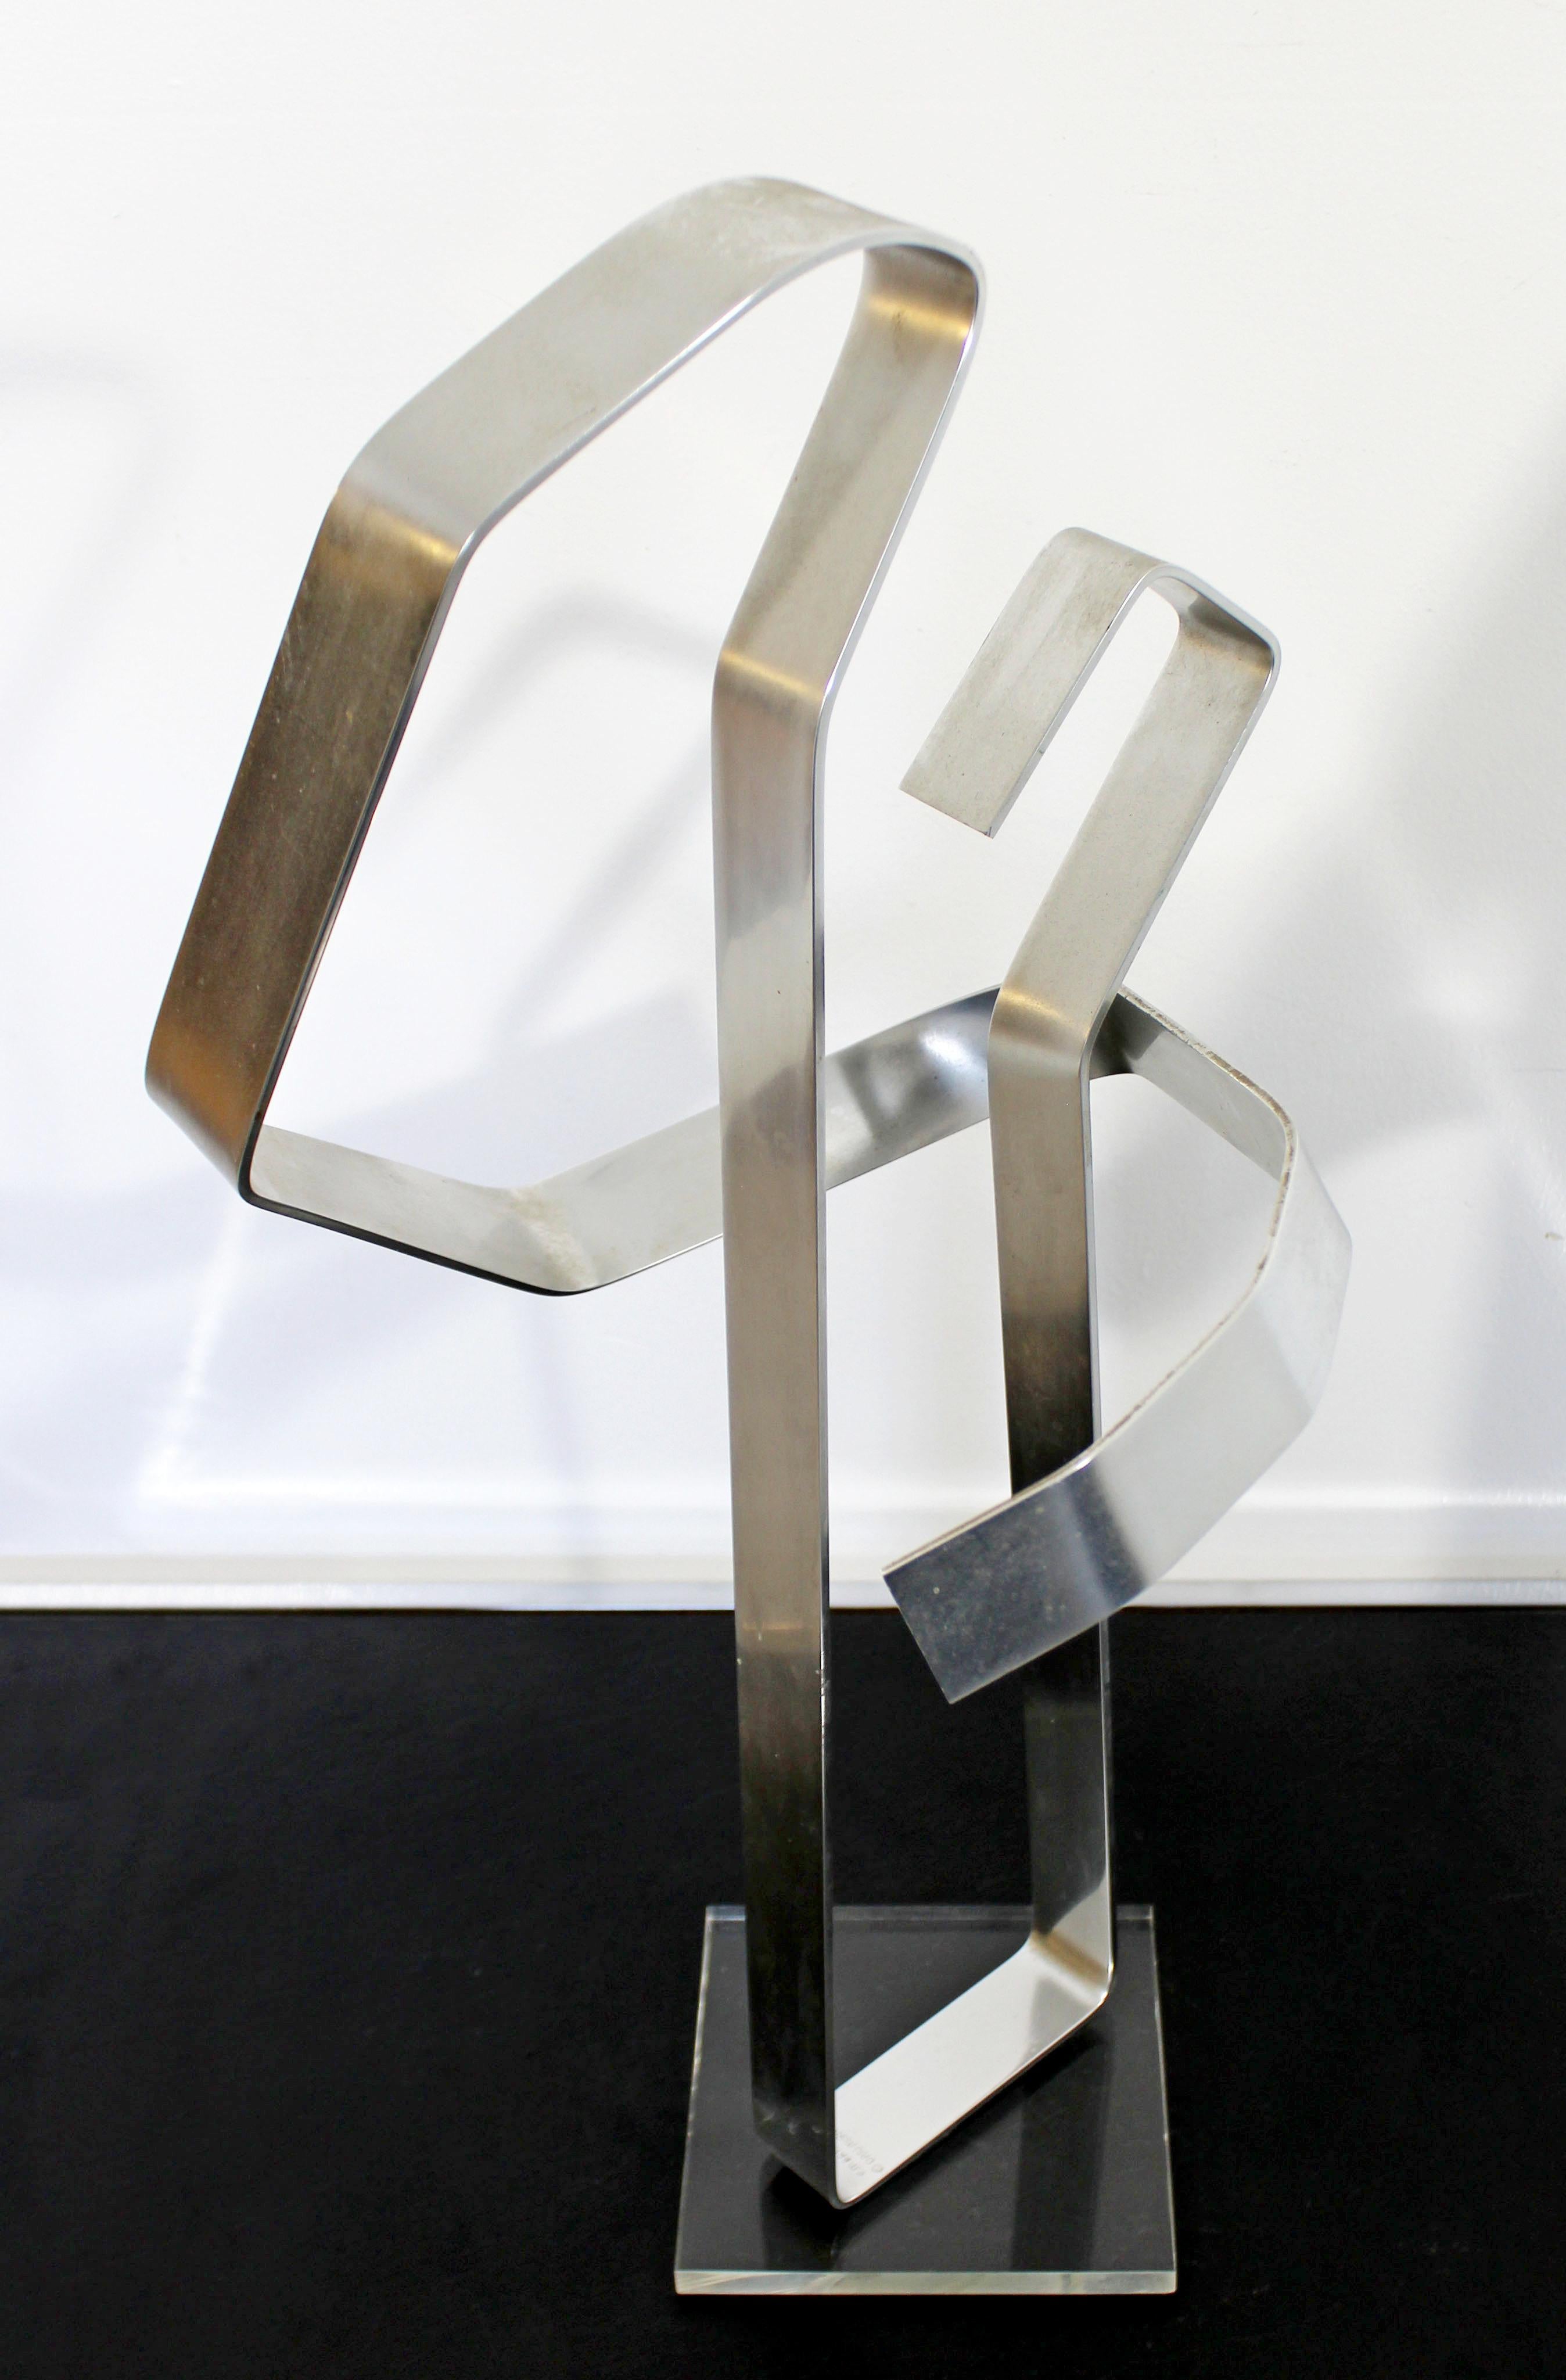 For your consideration is a thought provoking, abstracted, chrome metal table sculpture on a Lucite acrylic base, entitled 